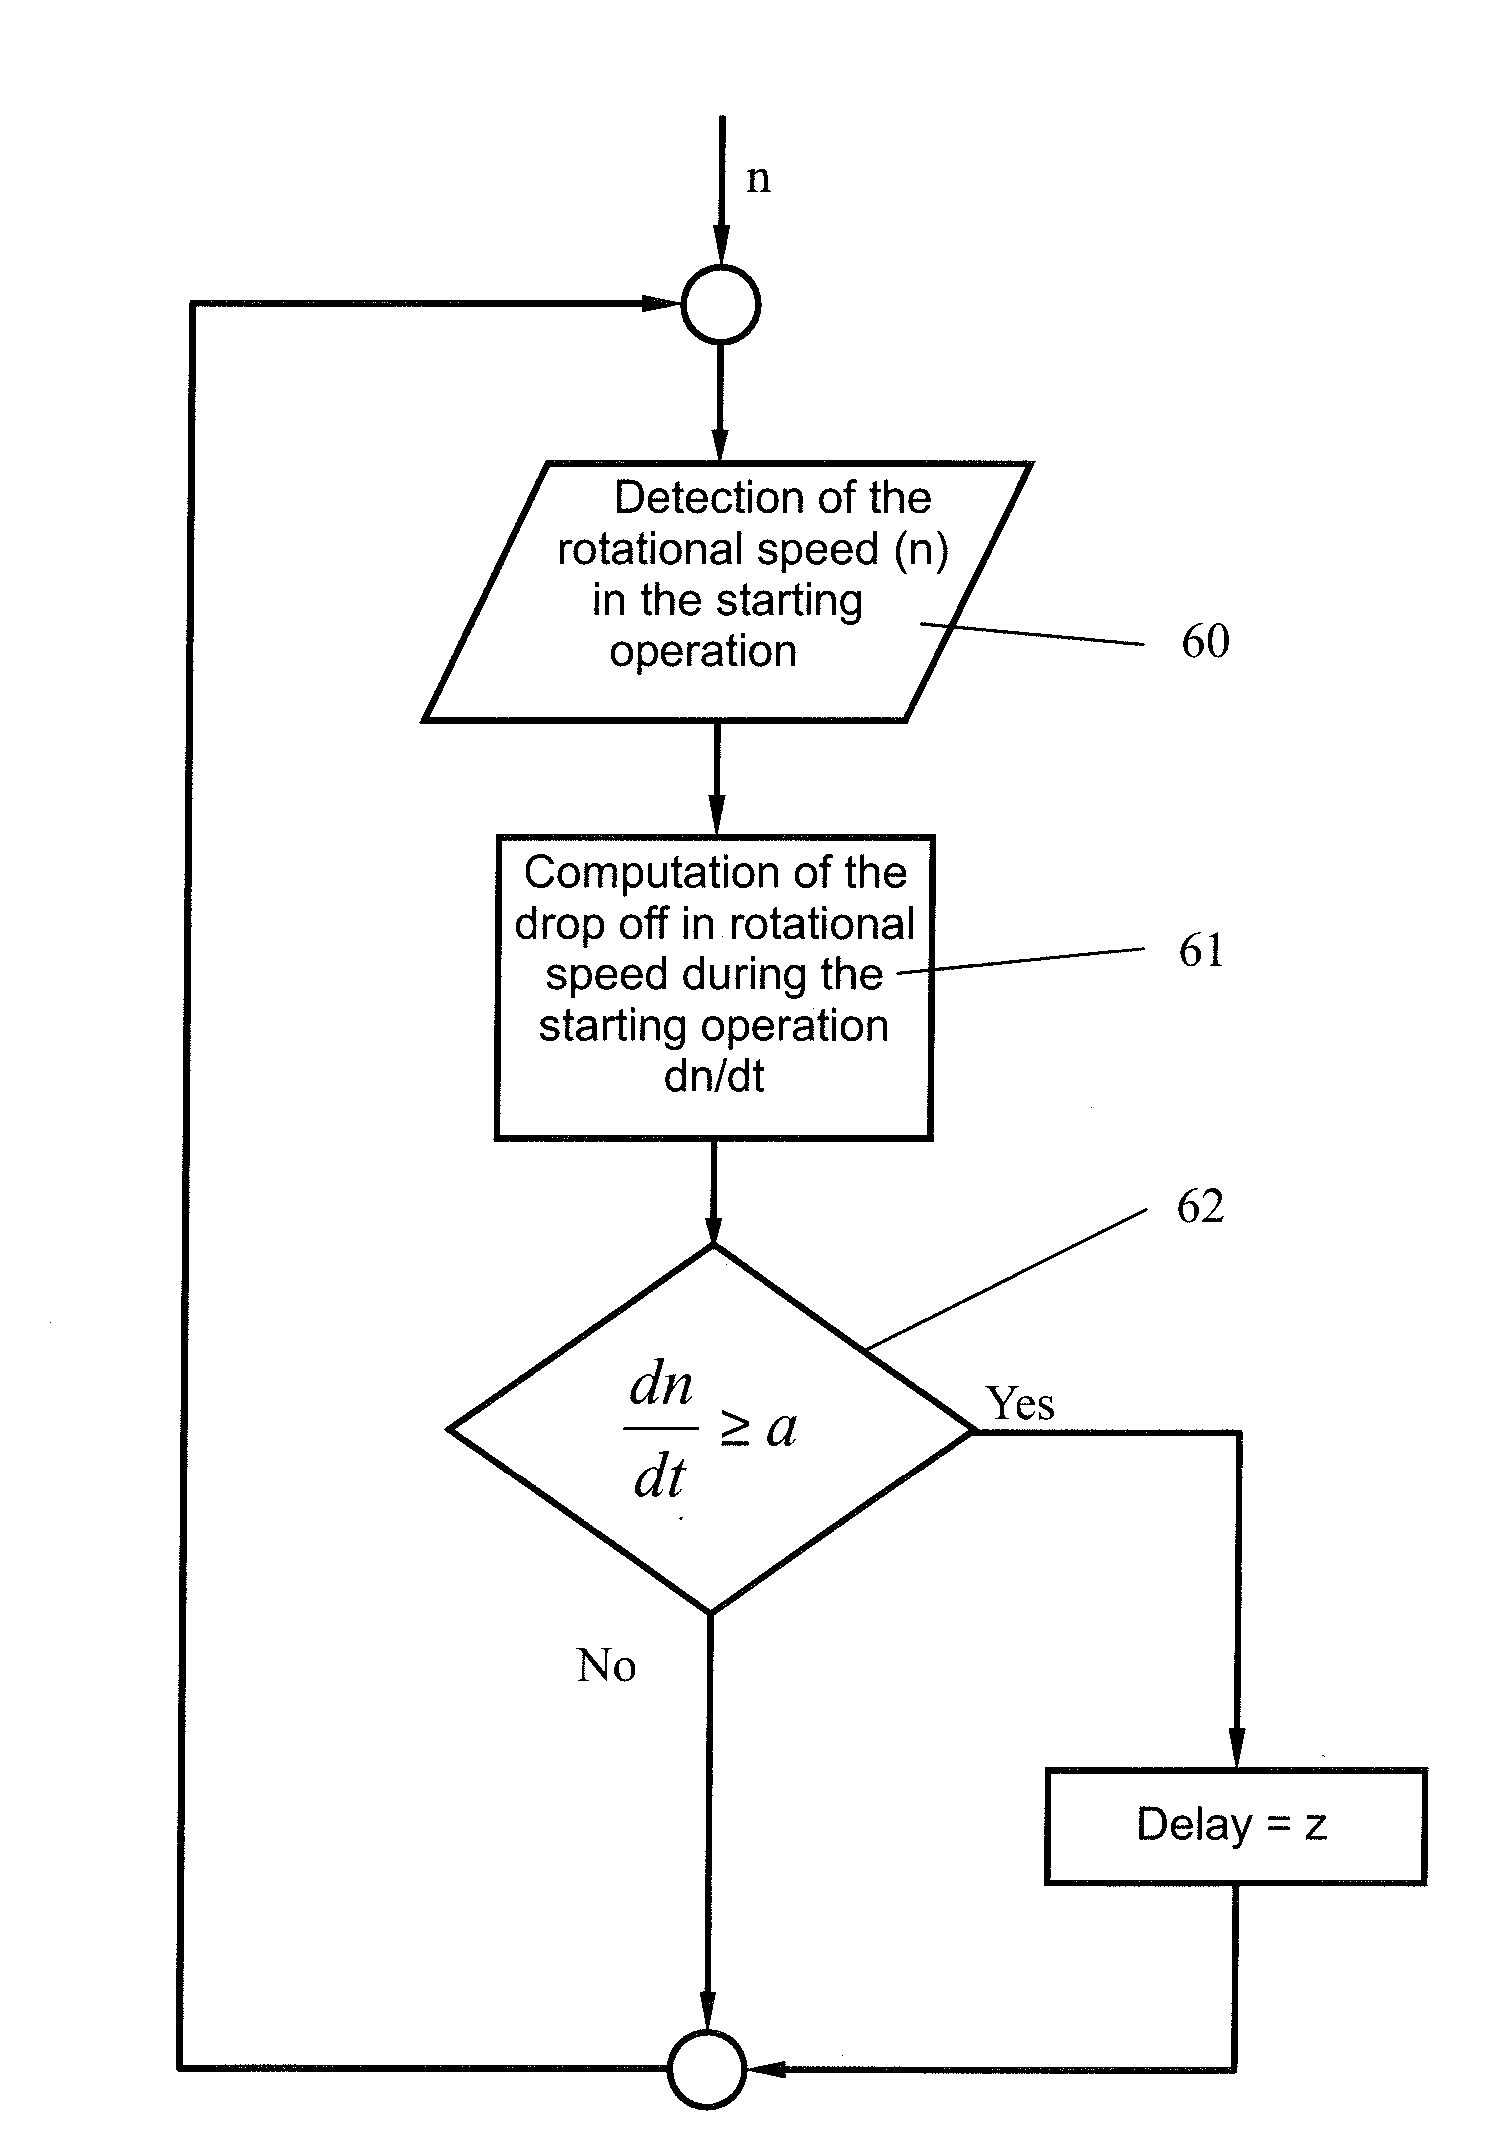 Method for starting a combustion engine having a starter apparatus